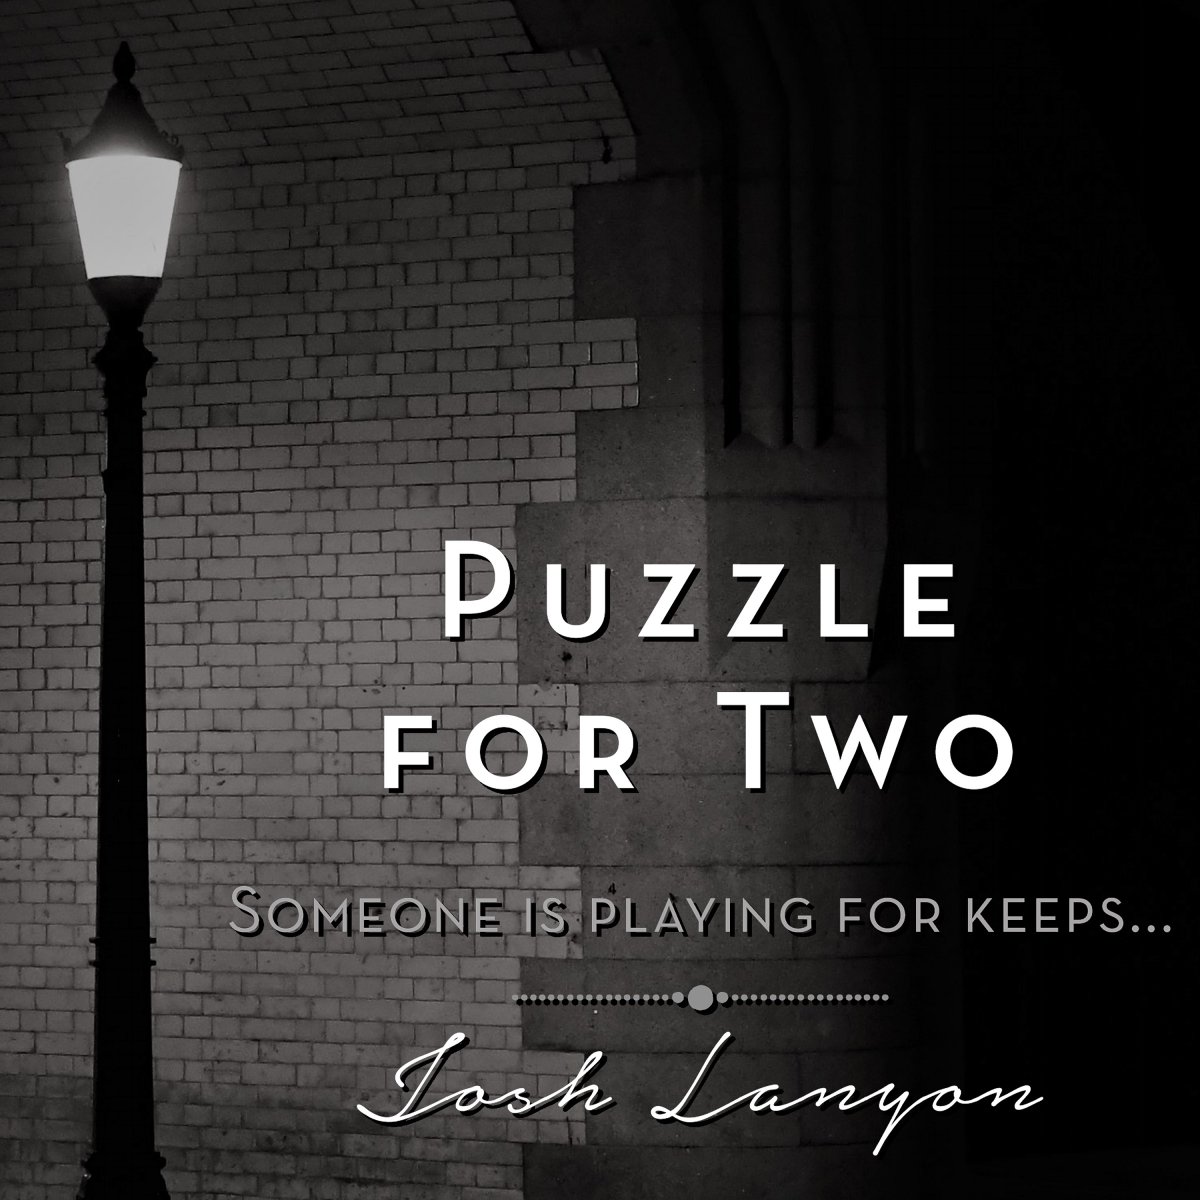 🕵️🧩 NEW IN AUDIO! 🕵️ 🧩A quirky PI mystery-romance PUZZLE FOR TWO narrated by James Woodrich 
adbl.co/3QAd5km  #LGBTQ #mysteryaudiobooks #newinaudio #audible